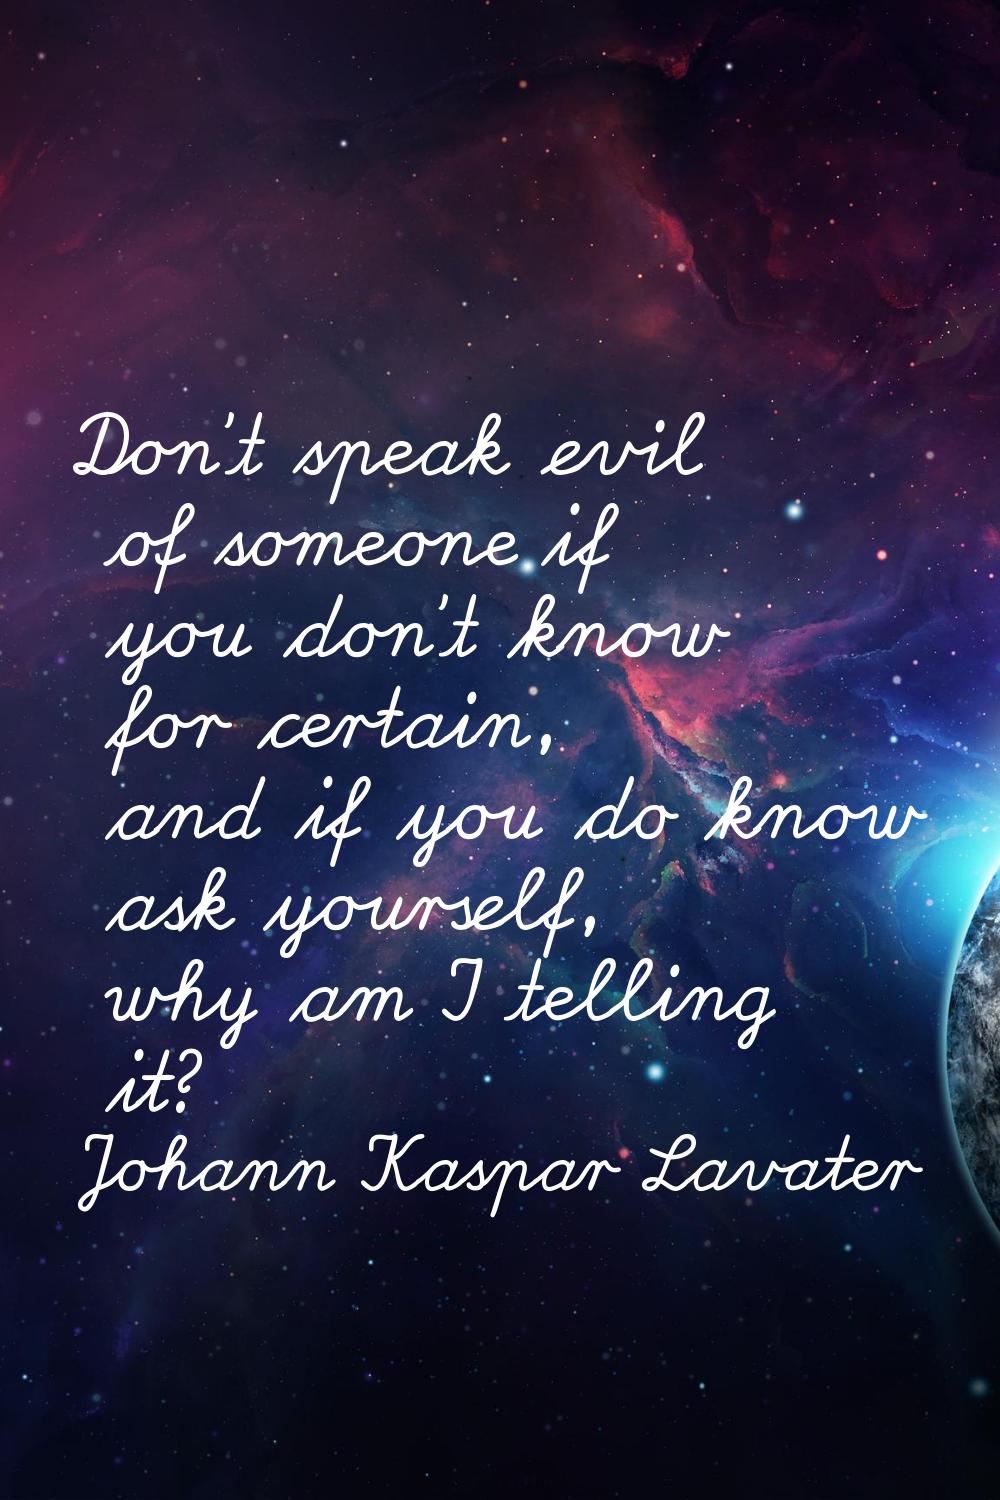 Don't speak evil of someone if you don't know for certain, and if you do know ask yourself, why am 